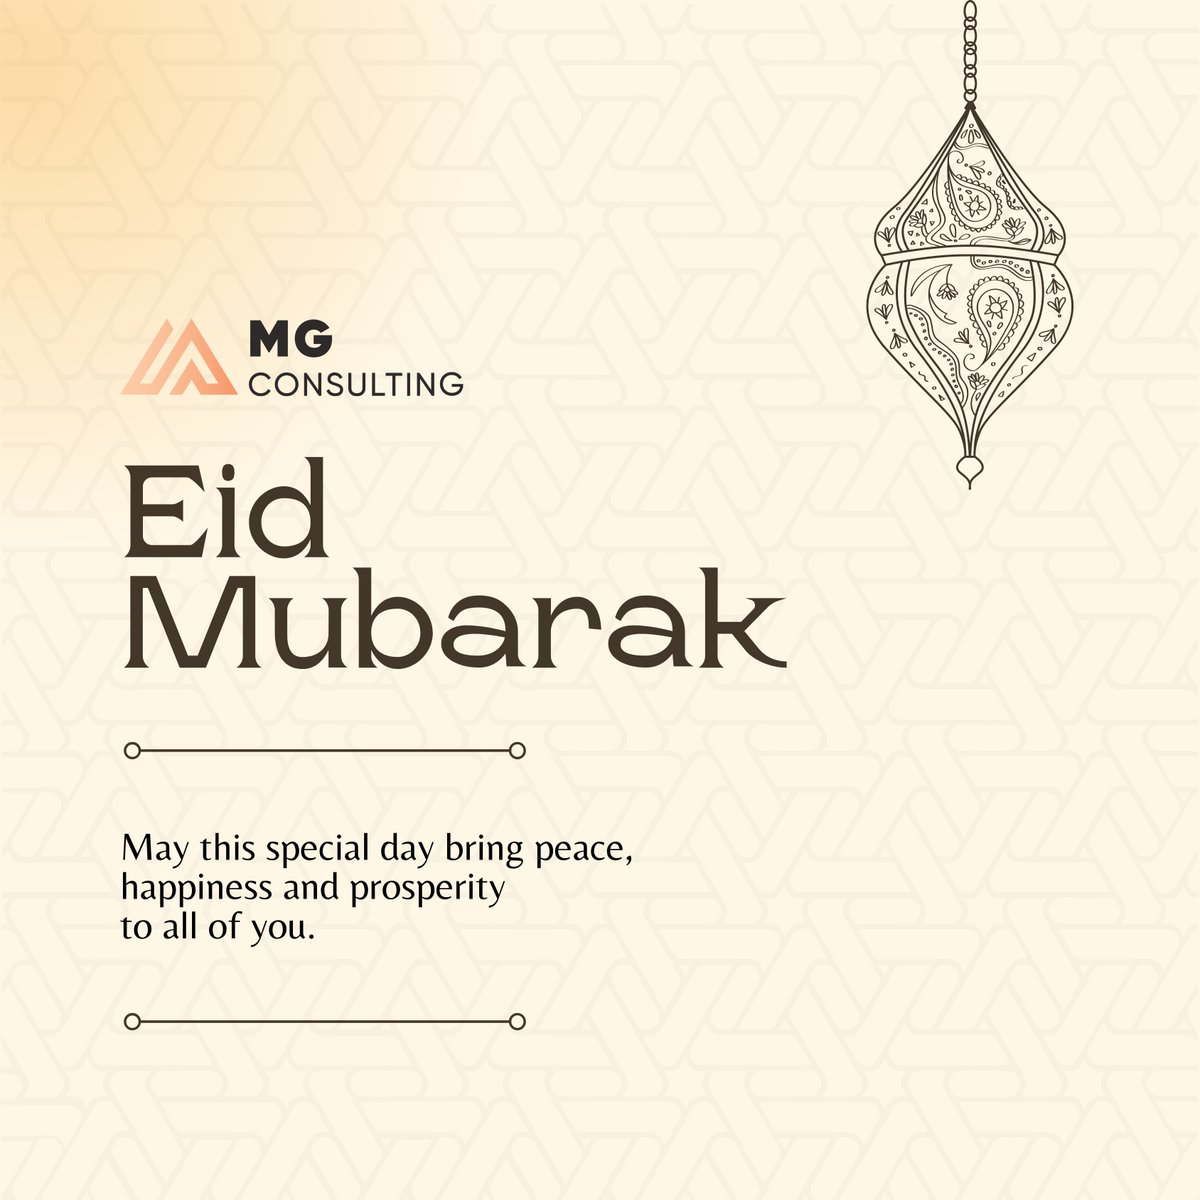 Wishing our colleagues, clients, and partners who are celebrating a joyous Eid Mubarak! May this festival bring peace, happiness, and prosperity.

#EidMubarak2024 #FestivalOfJoy #MGConsulting